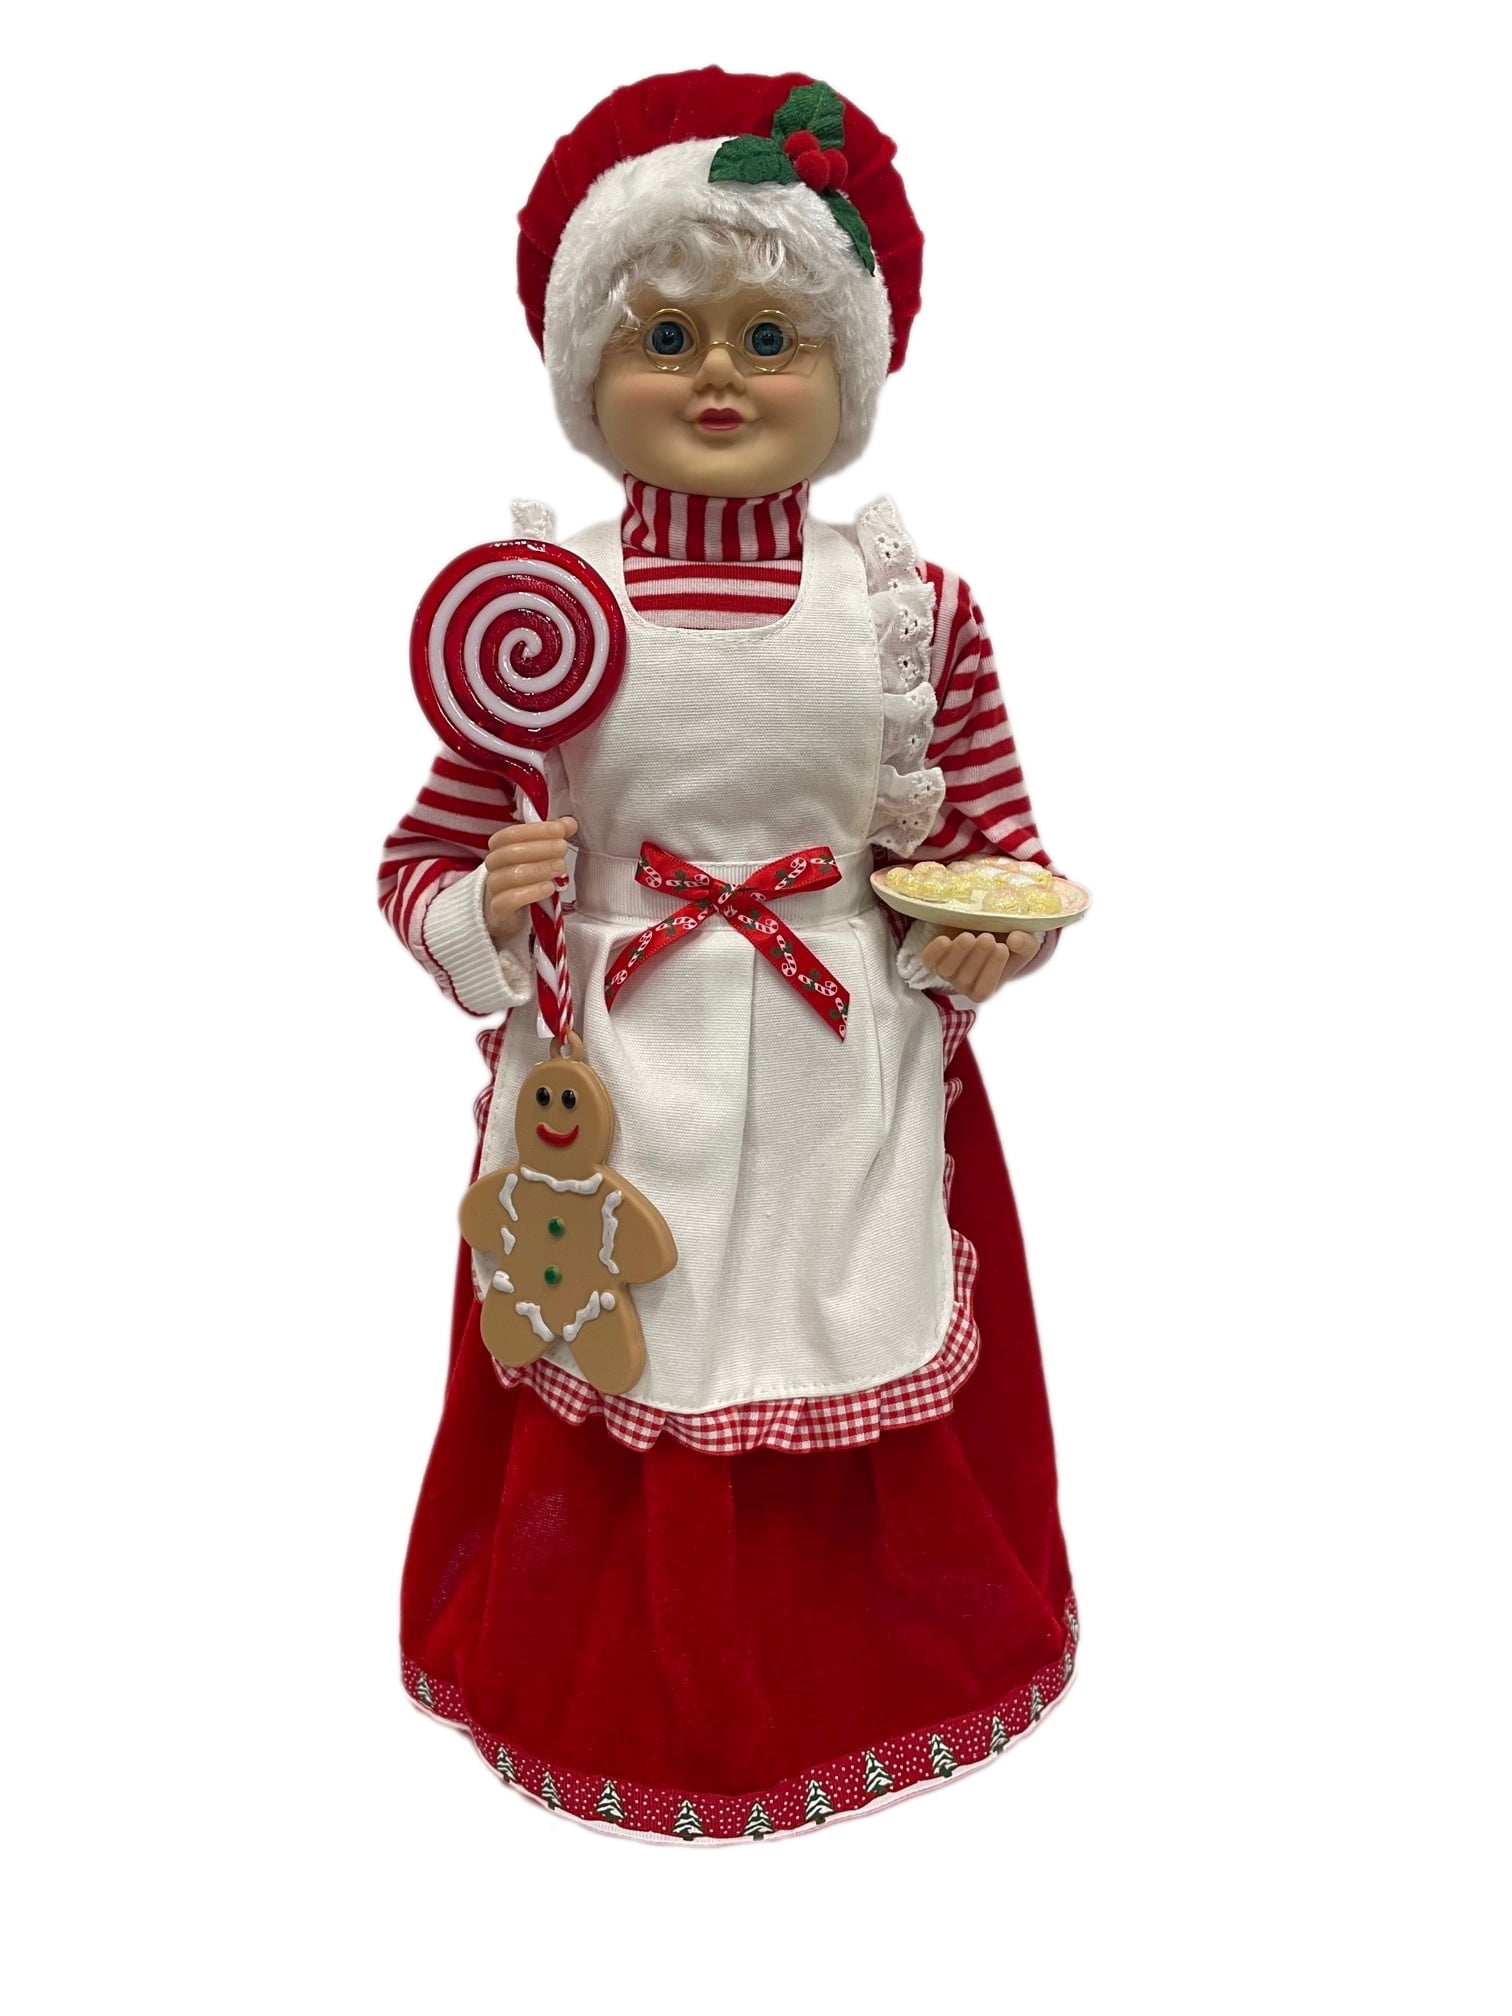 Mrs Claus Aprons Sexy Funny Digital Printed Mrs Claus Apron For